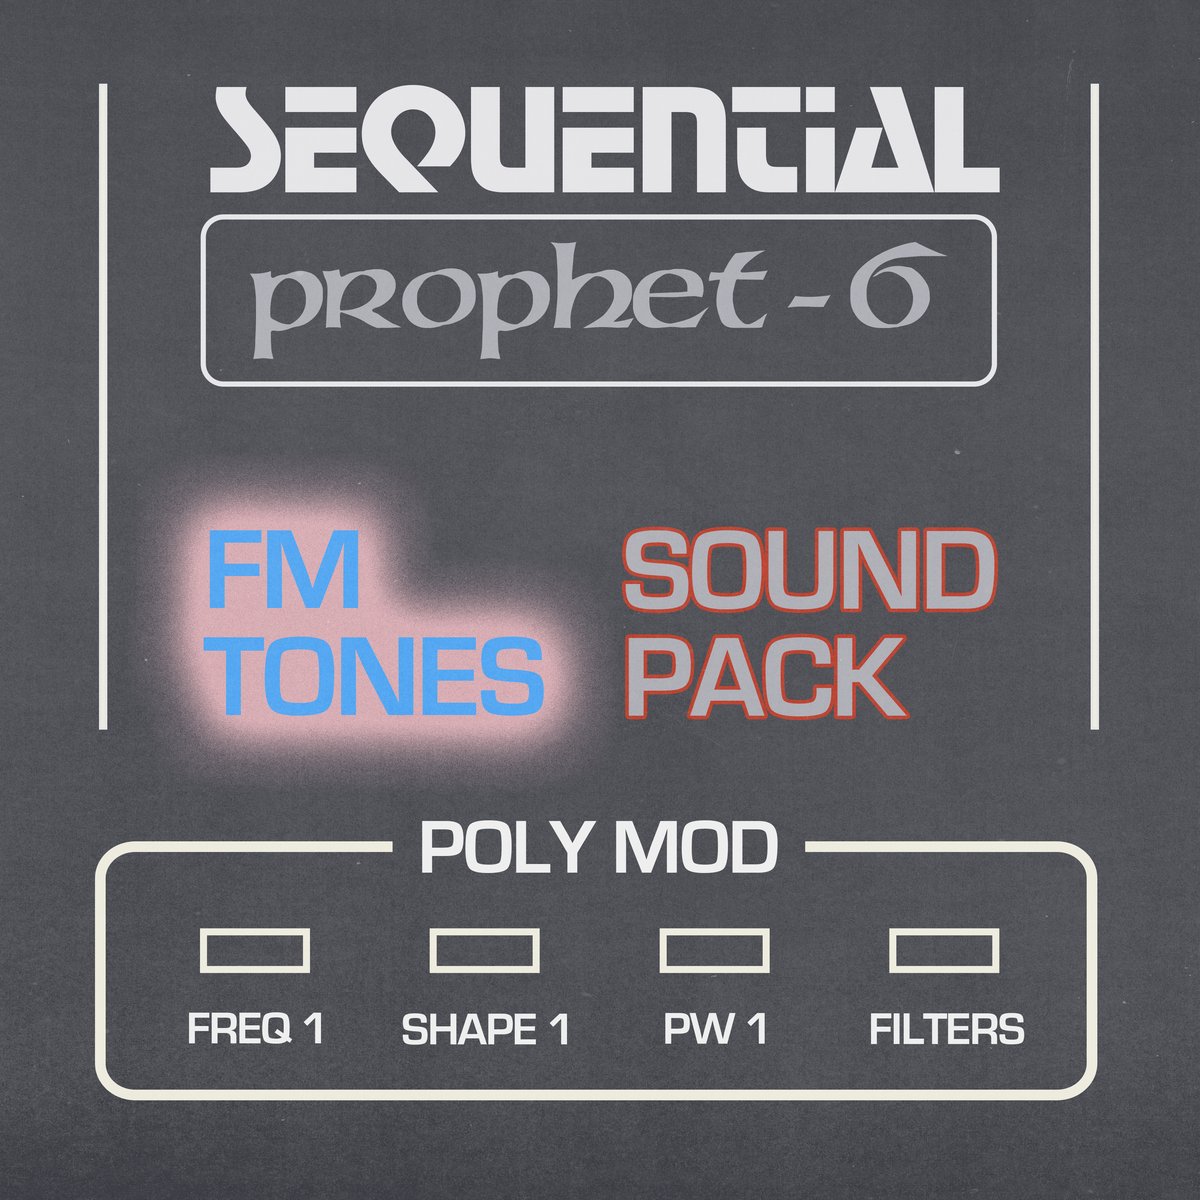 Image of SEQUENTIAL PROPHET-6 FM SOUND PACK